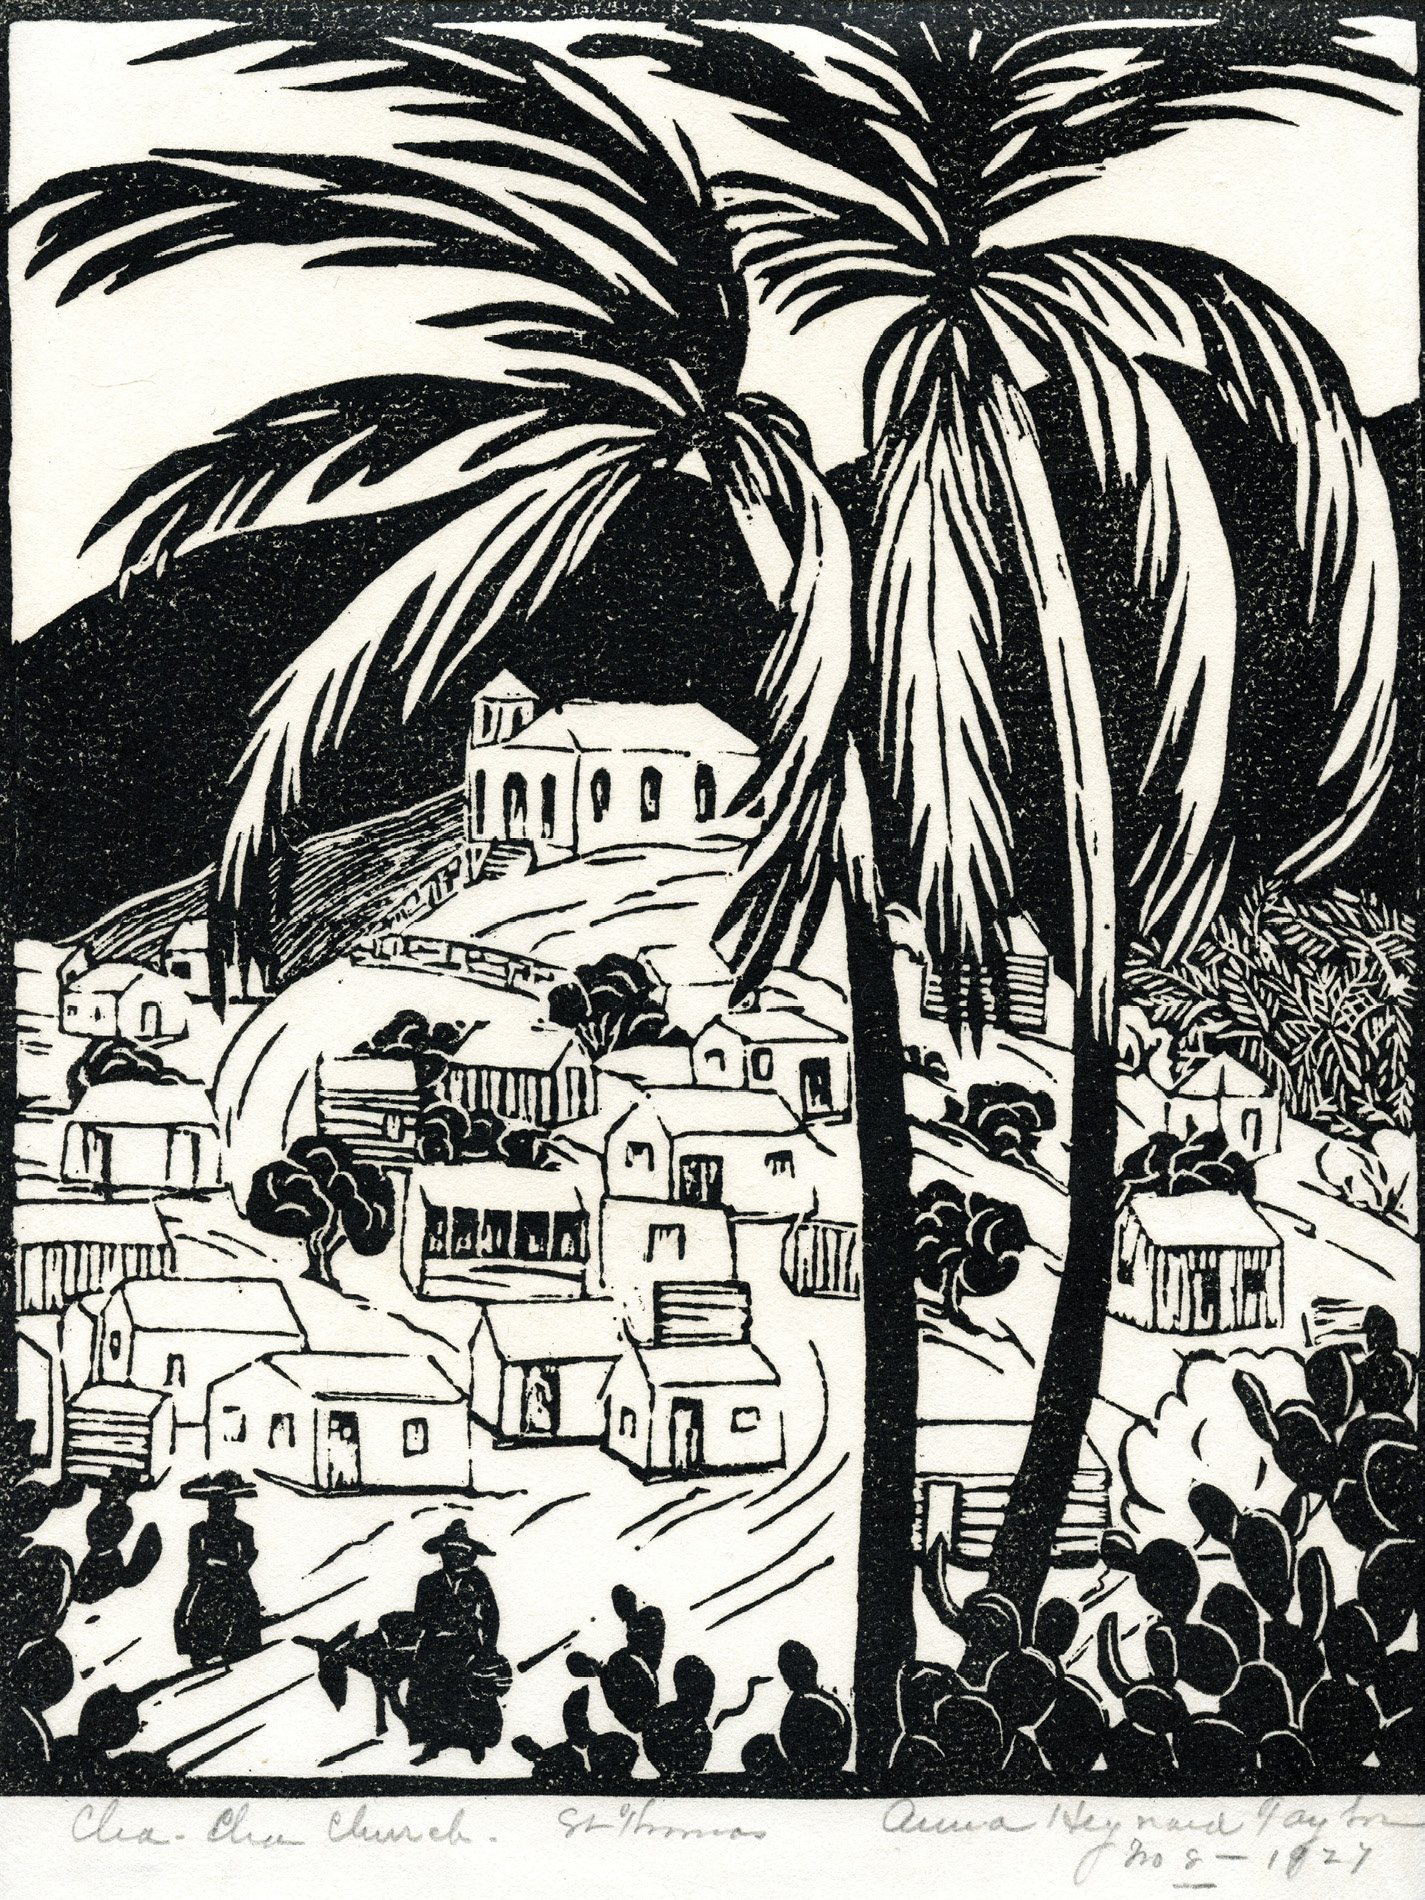 Two years after her 1926 visit to St. Thomas with Rachel Hartley, Taylor created this woodblock print, Cha Cha Church, St. Thomas, depicting the hillside of houses and a church at the top.